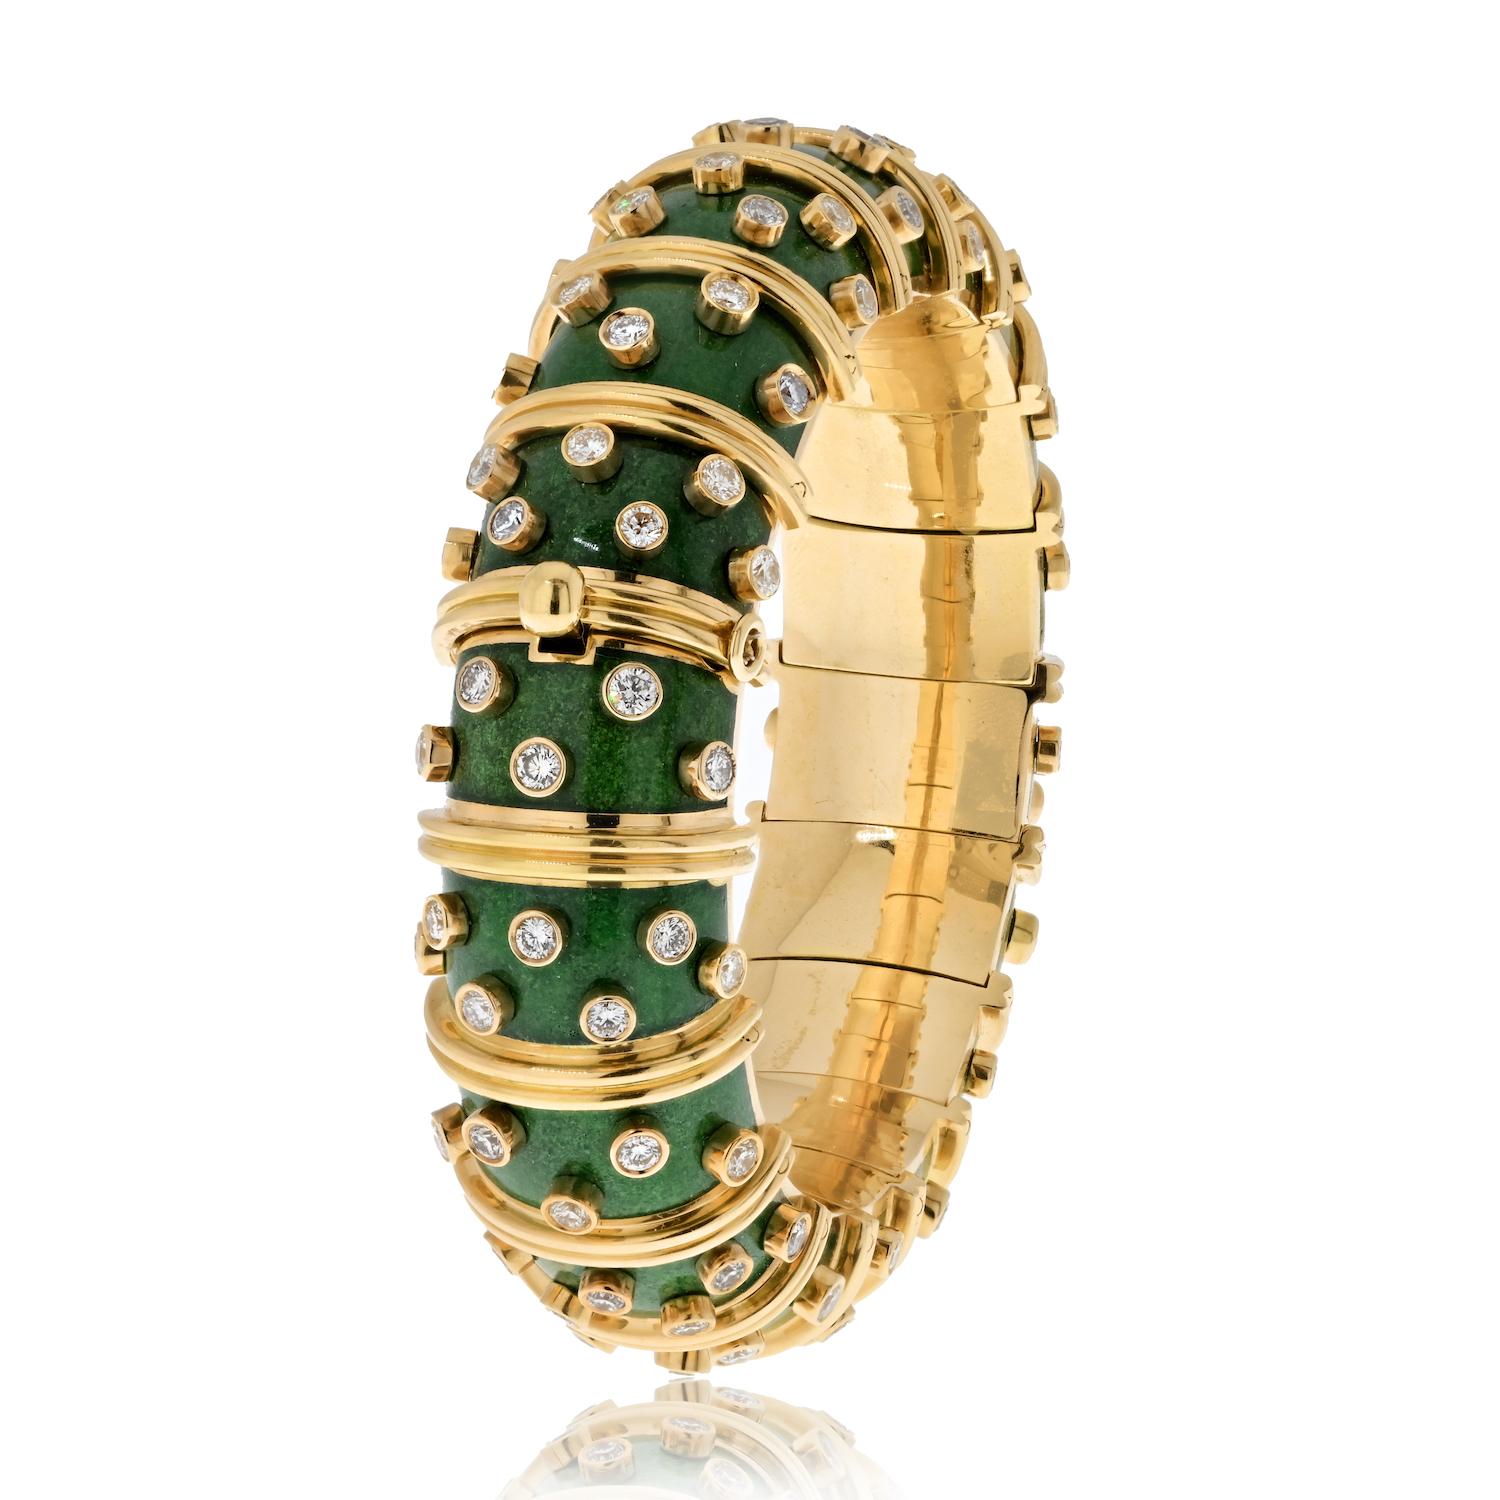 Behold this exquisite creation, a green paillonne enamel hinged bangle that encapsulates the brilliance of design and craftsmanship. This bangle is adorned with collet-set diamonds, each sparkling with its unique radiance, while sculpted 18k gold